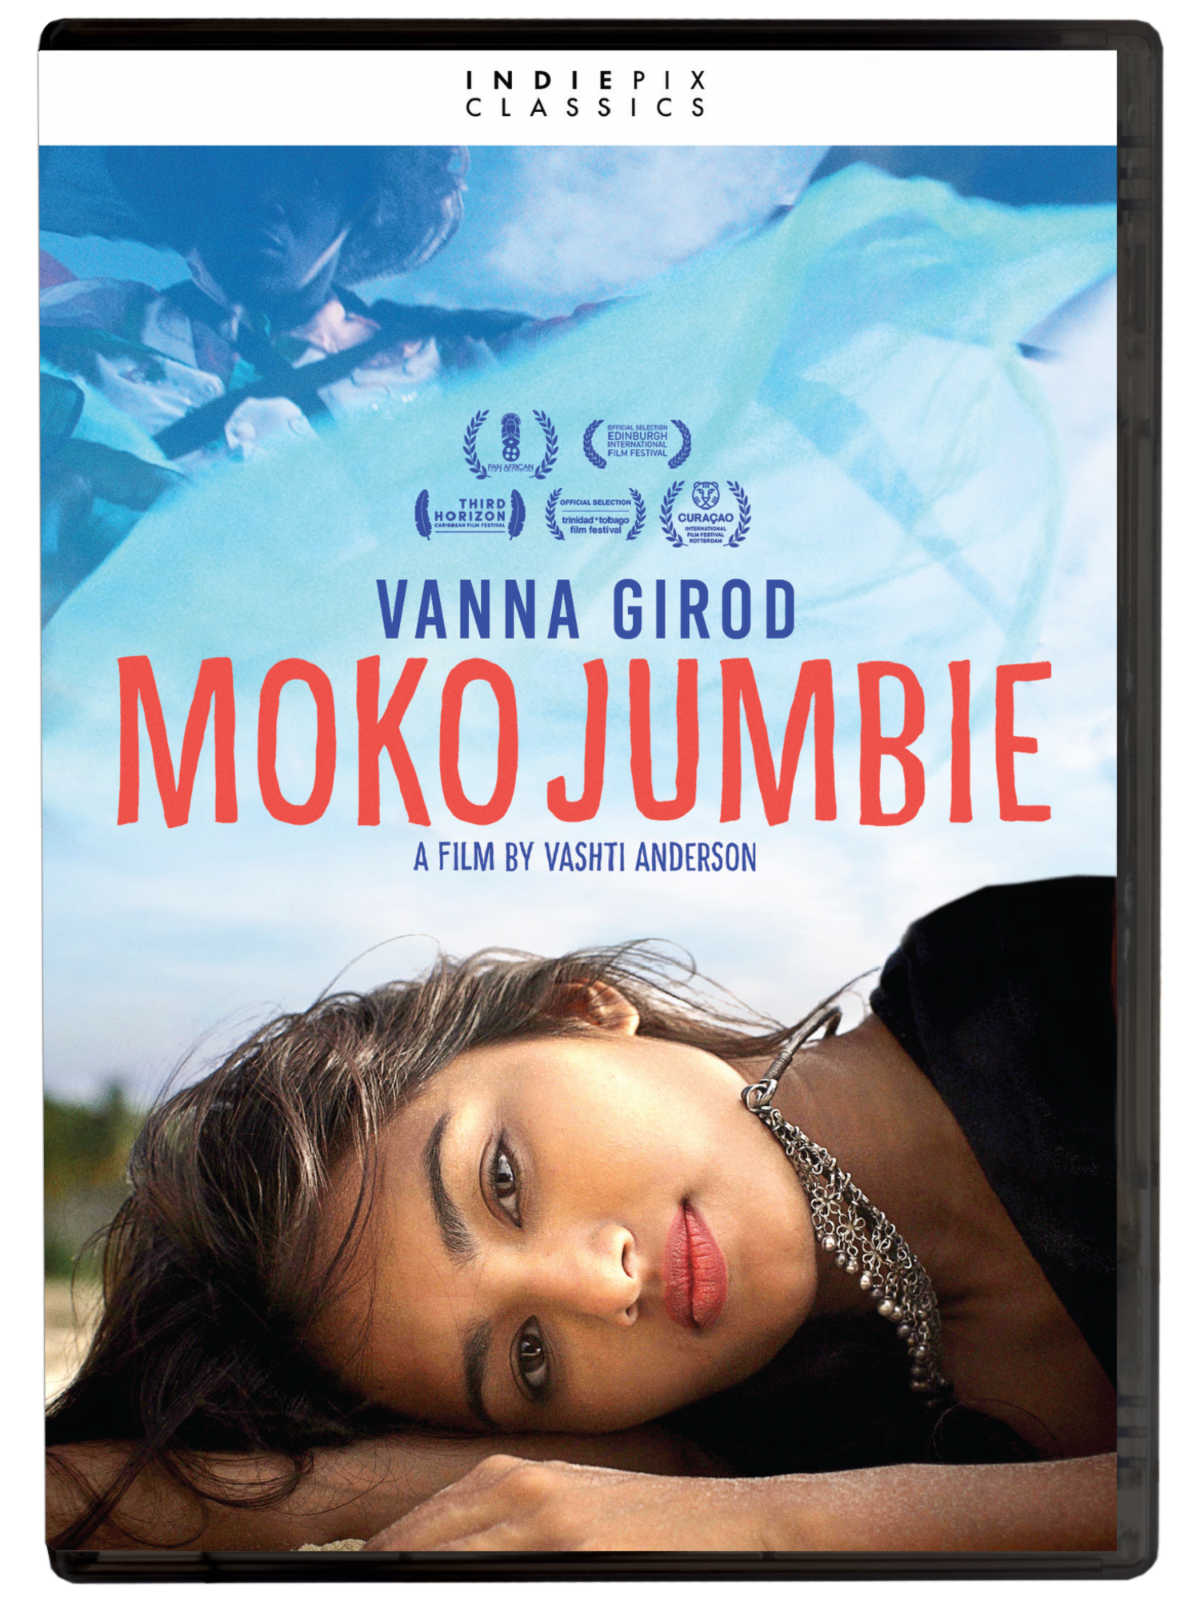 Indiepix Classics' new release, Moko Jumbie, is a gothic punk Caribbean love story set in the ruins of a coconut plantation in rural Trinidad.